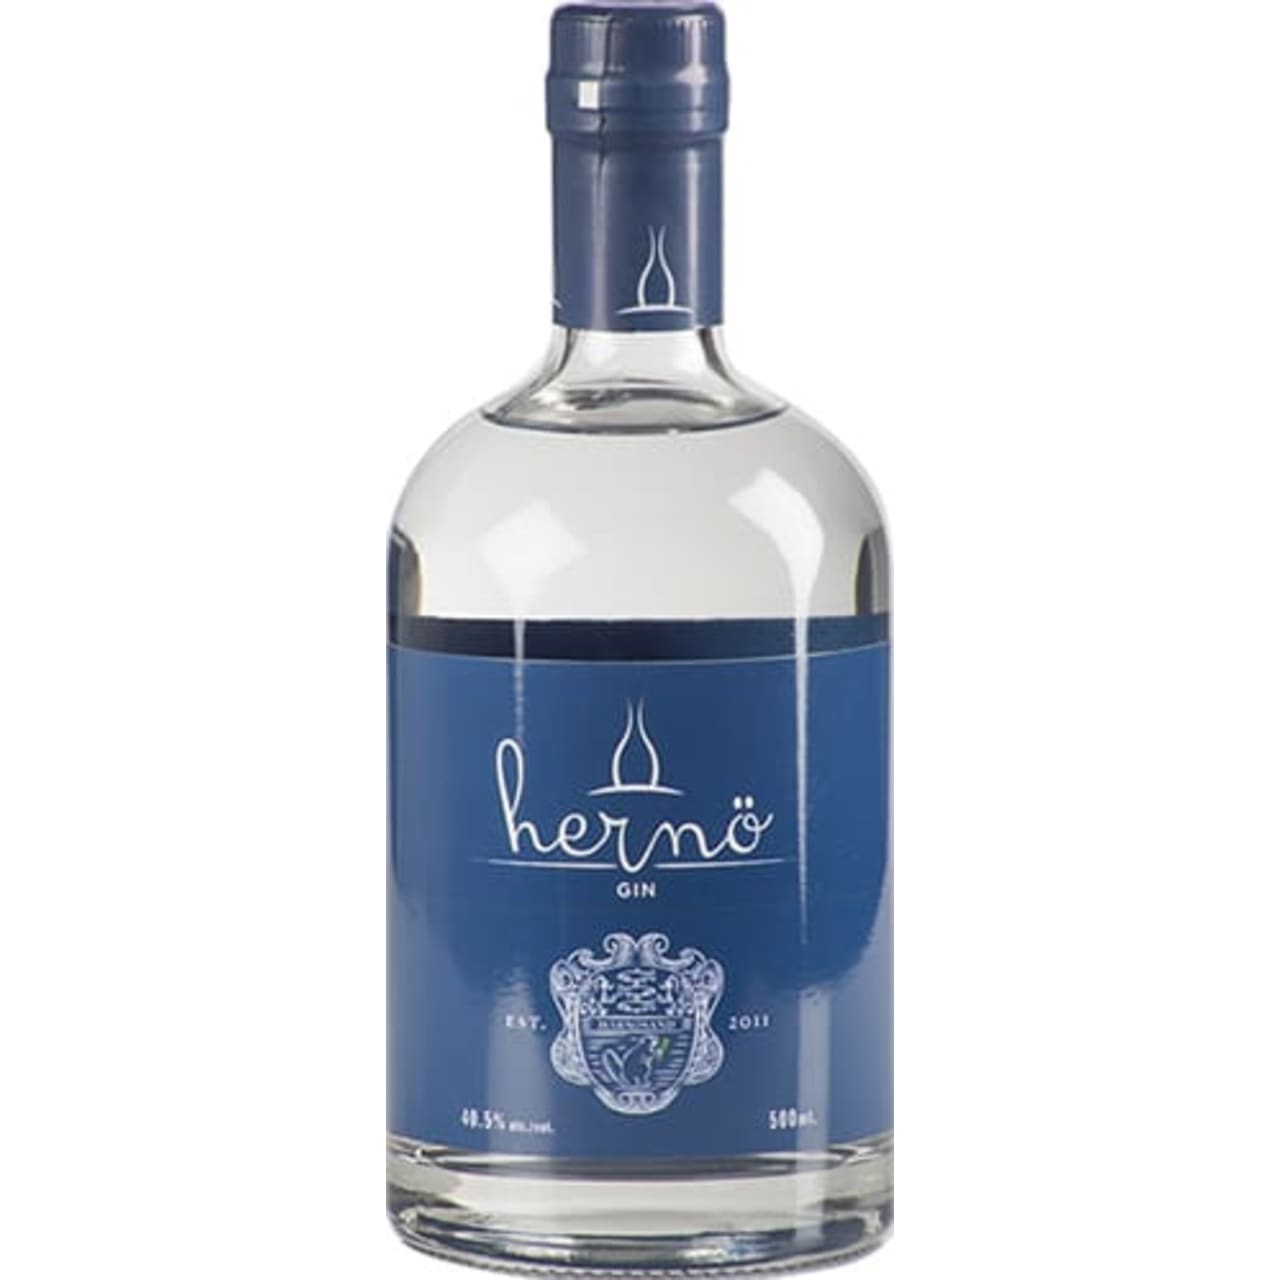 A round and smooth London dry gin, with a juniper character, fresh citrus notes and a floral complexity which makes the gin very enjoyable on its own.